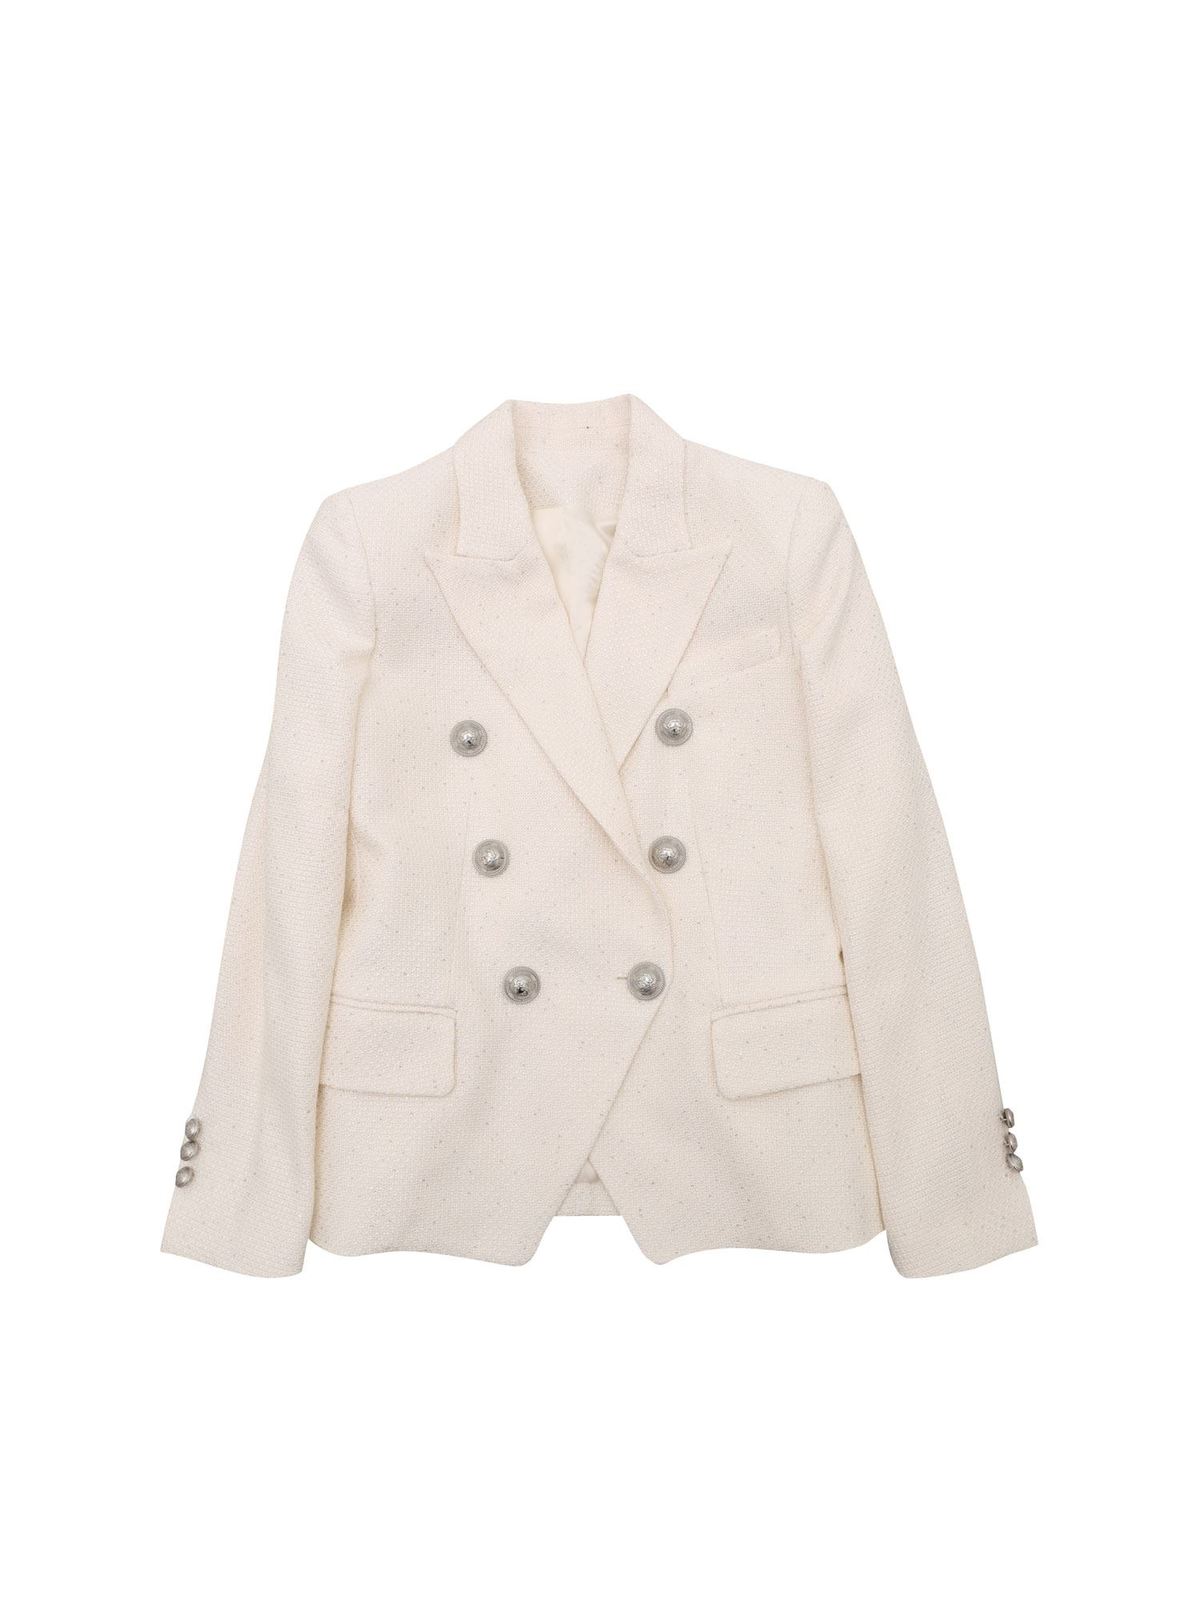 BALMAIN SEQUINS DOUBLE-BREASTED JACKET IN WHITE